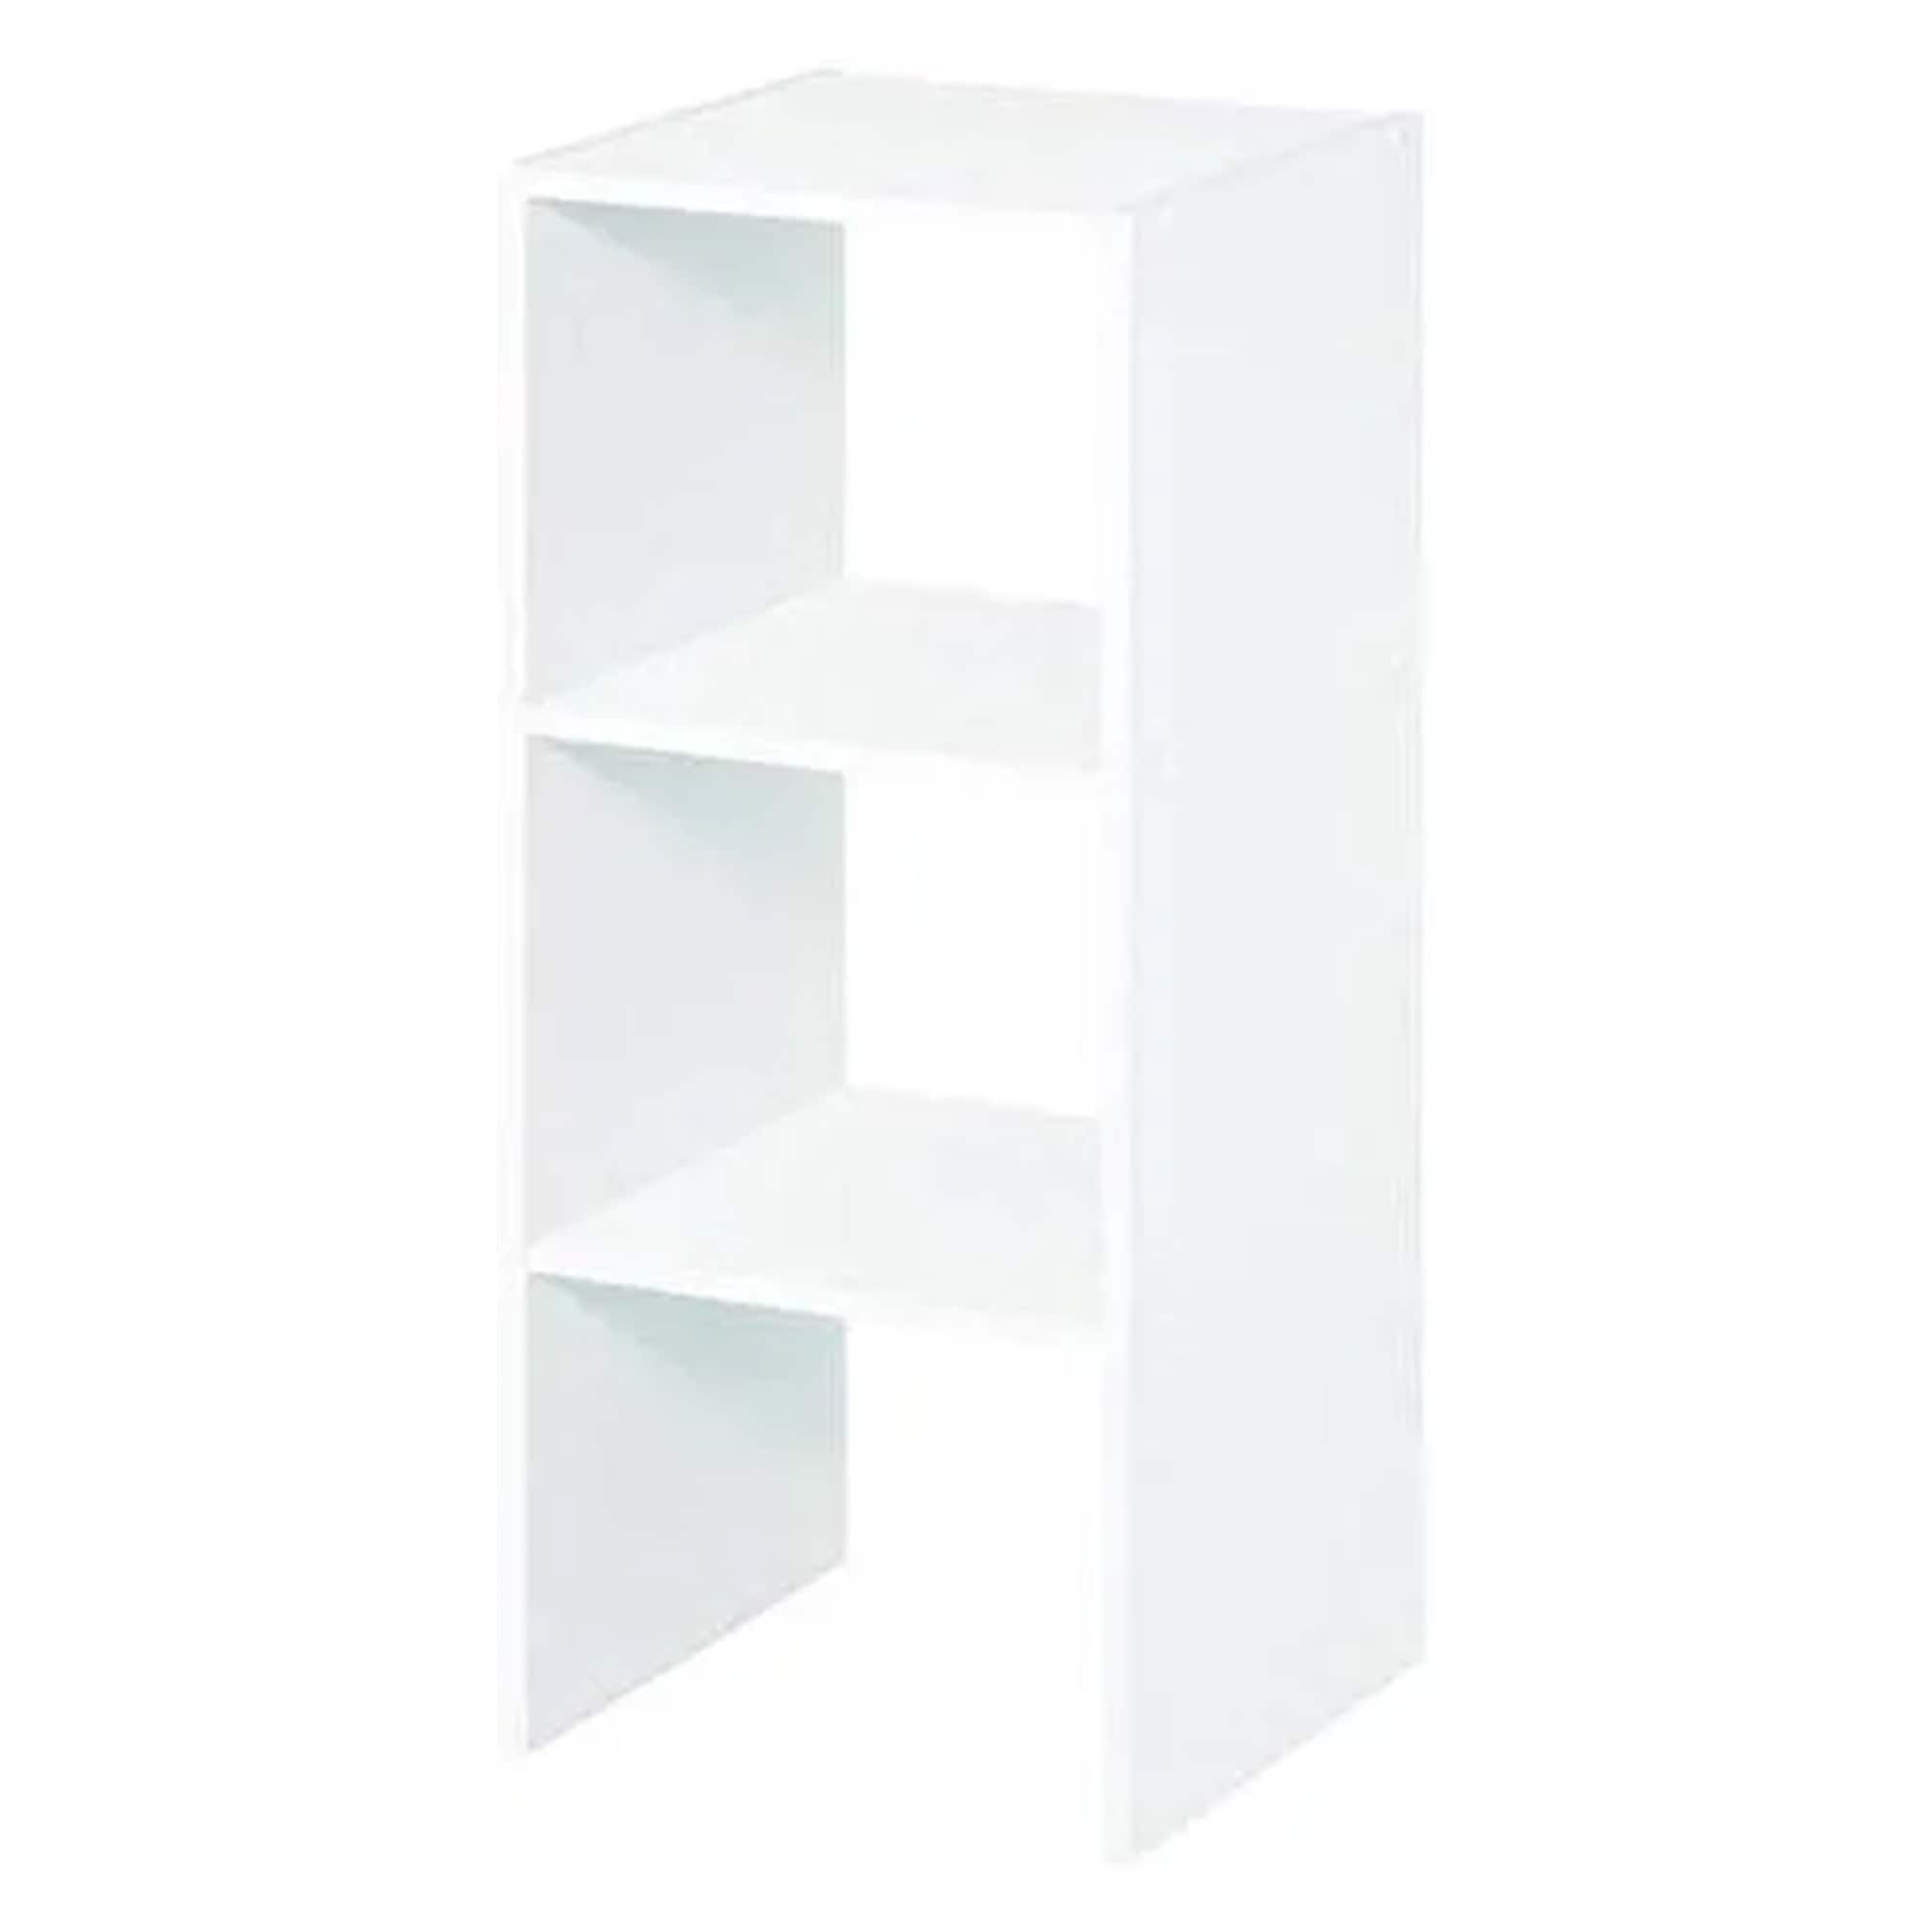 https://ak1.ostkcdn.com/images/products/is/images/direct/f309f881438e8384fe43215ffb9e24a29f7d089c/Closetmaid-Decorative-Home-Stackable-2-Cube-Cubeicals-Organizer-Storage%2C-White.jpg